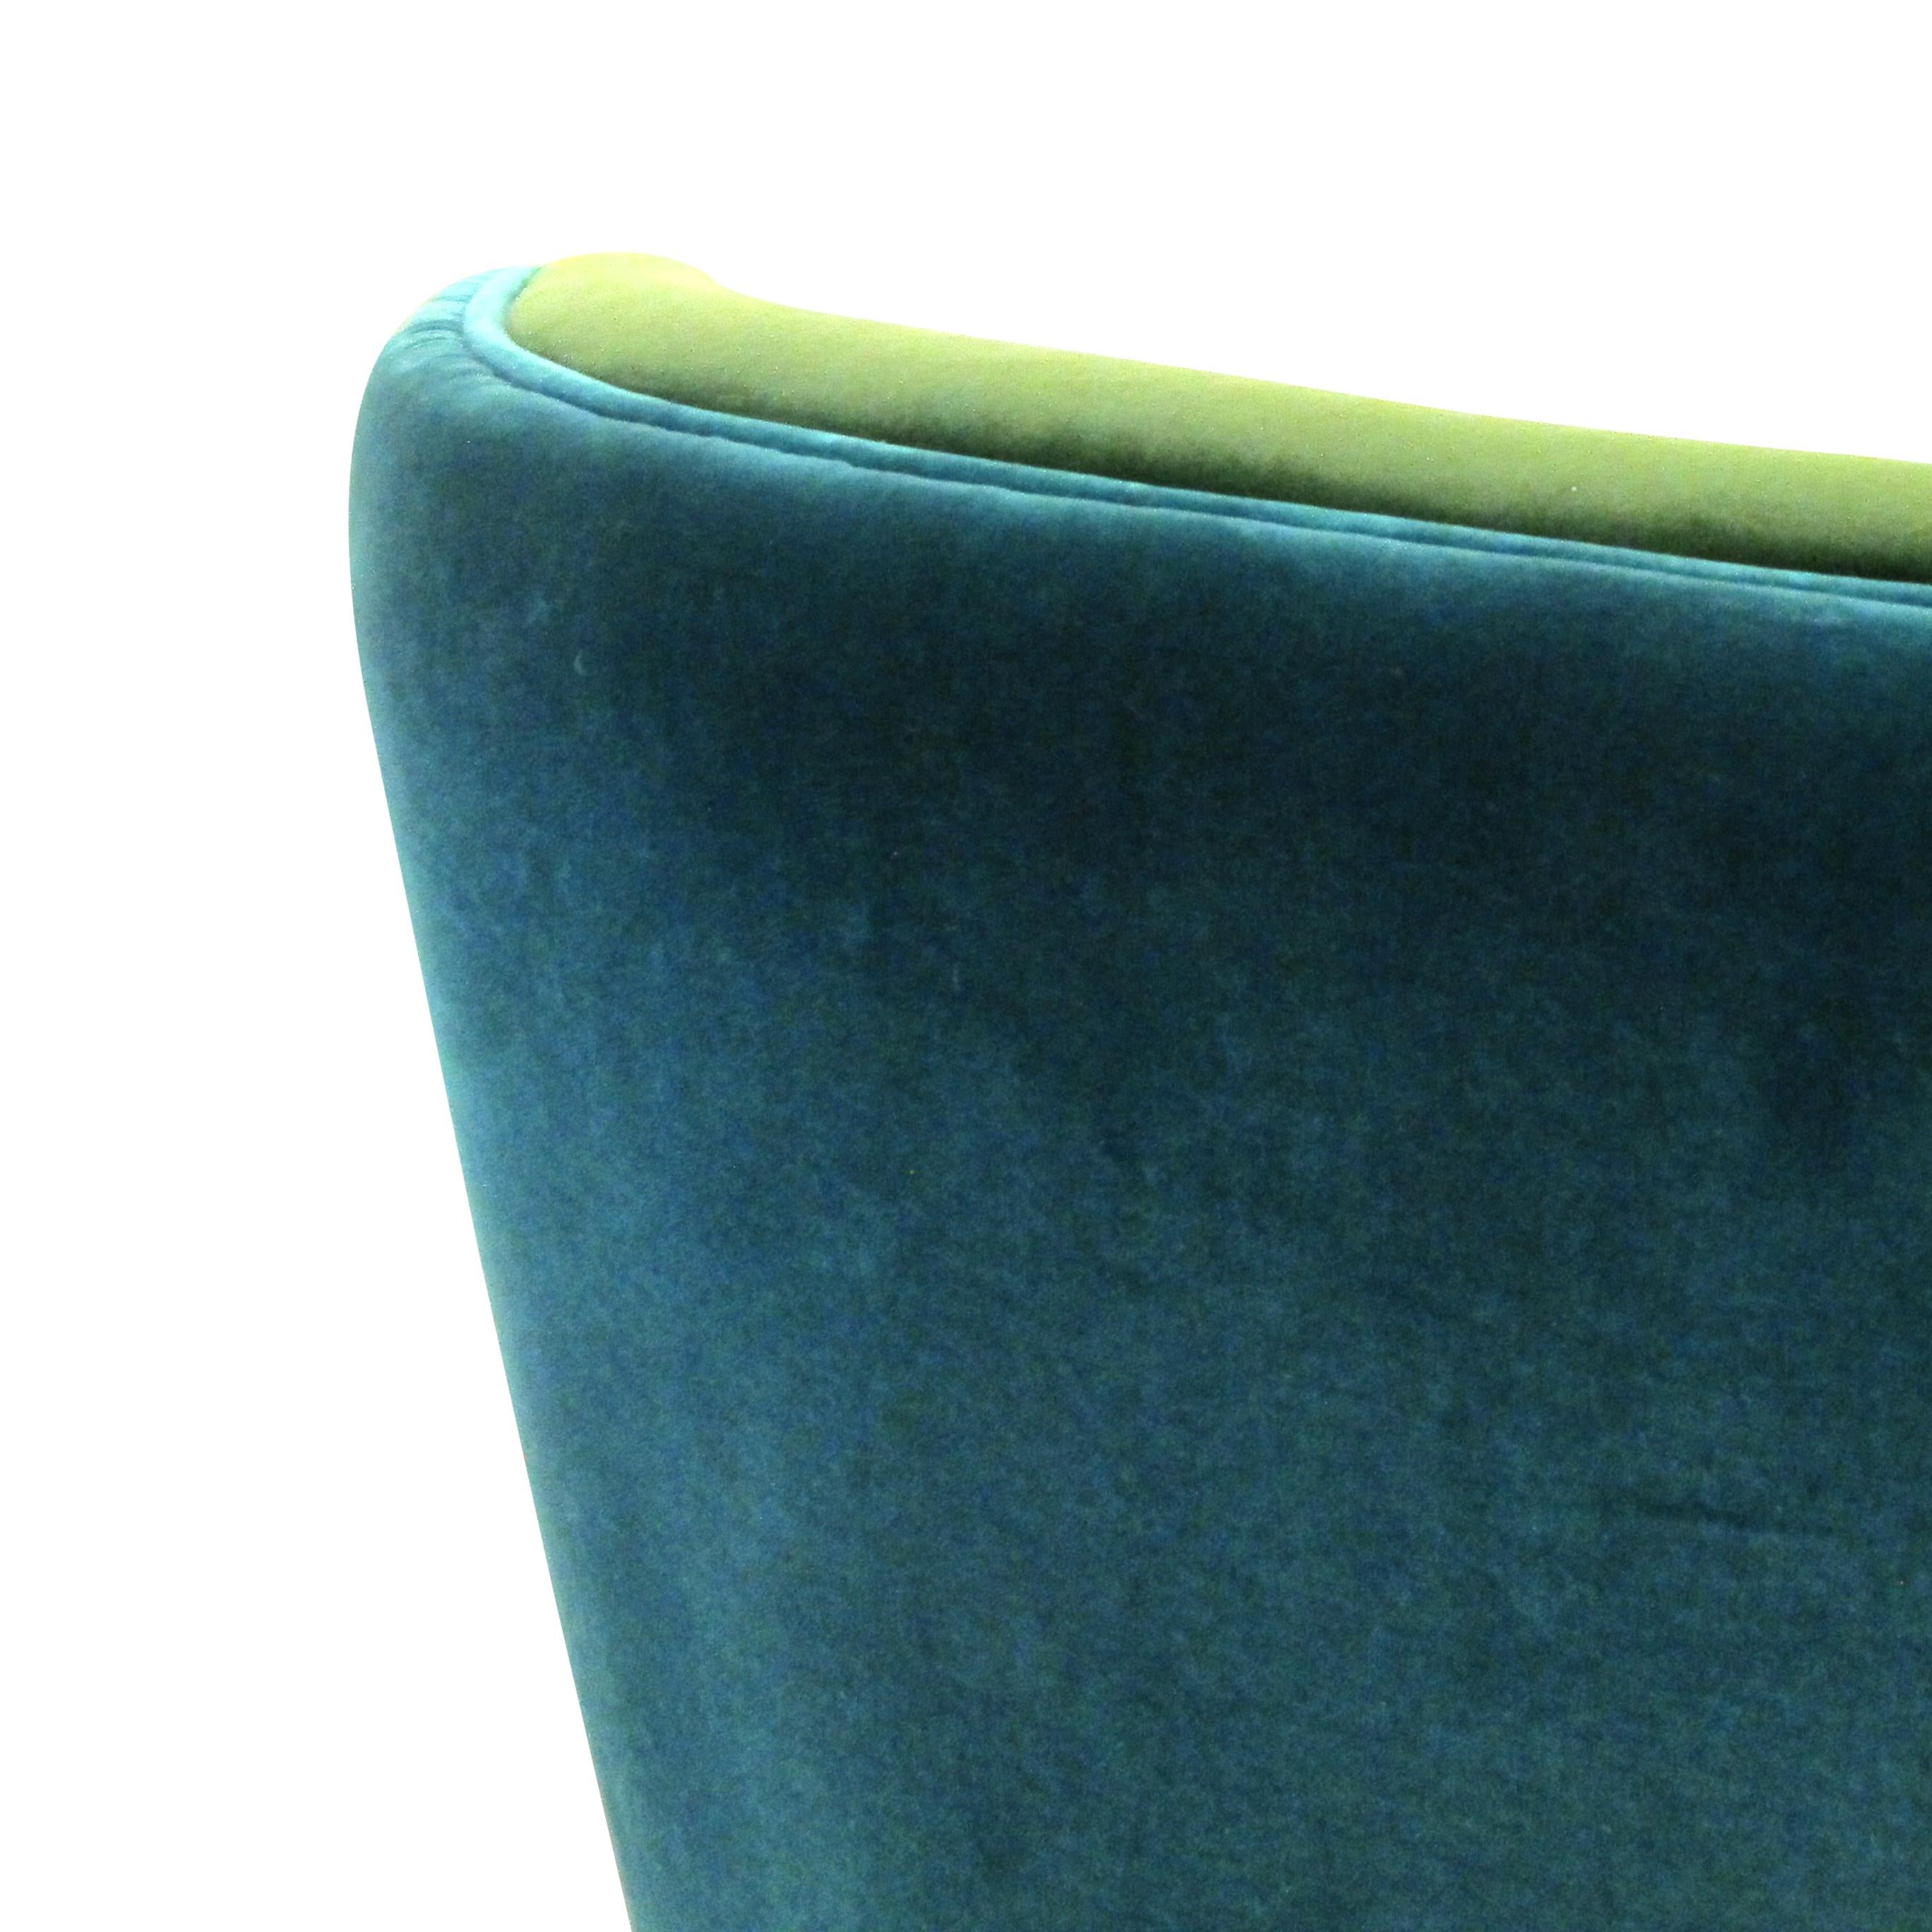 Contemporary Pair of Custom Made Armchairs Upholstered in Green & Torquoise Velvet Fabric